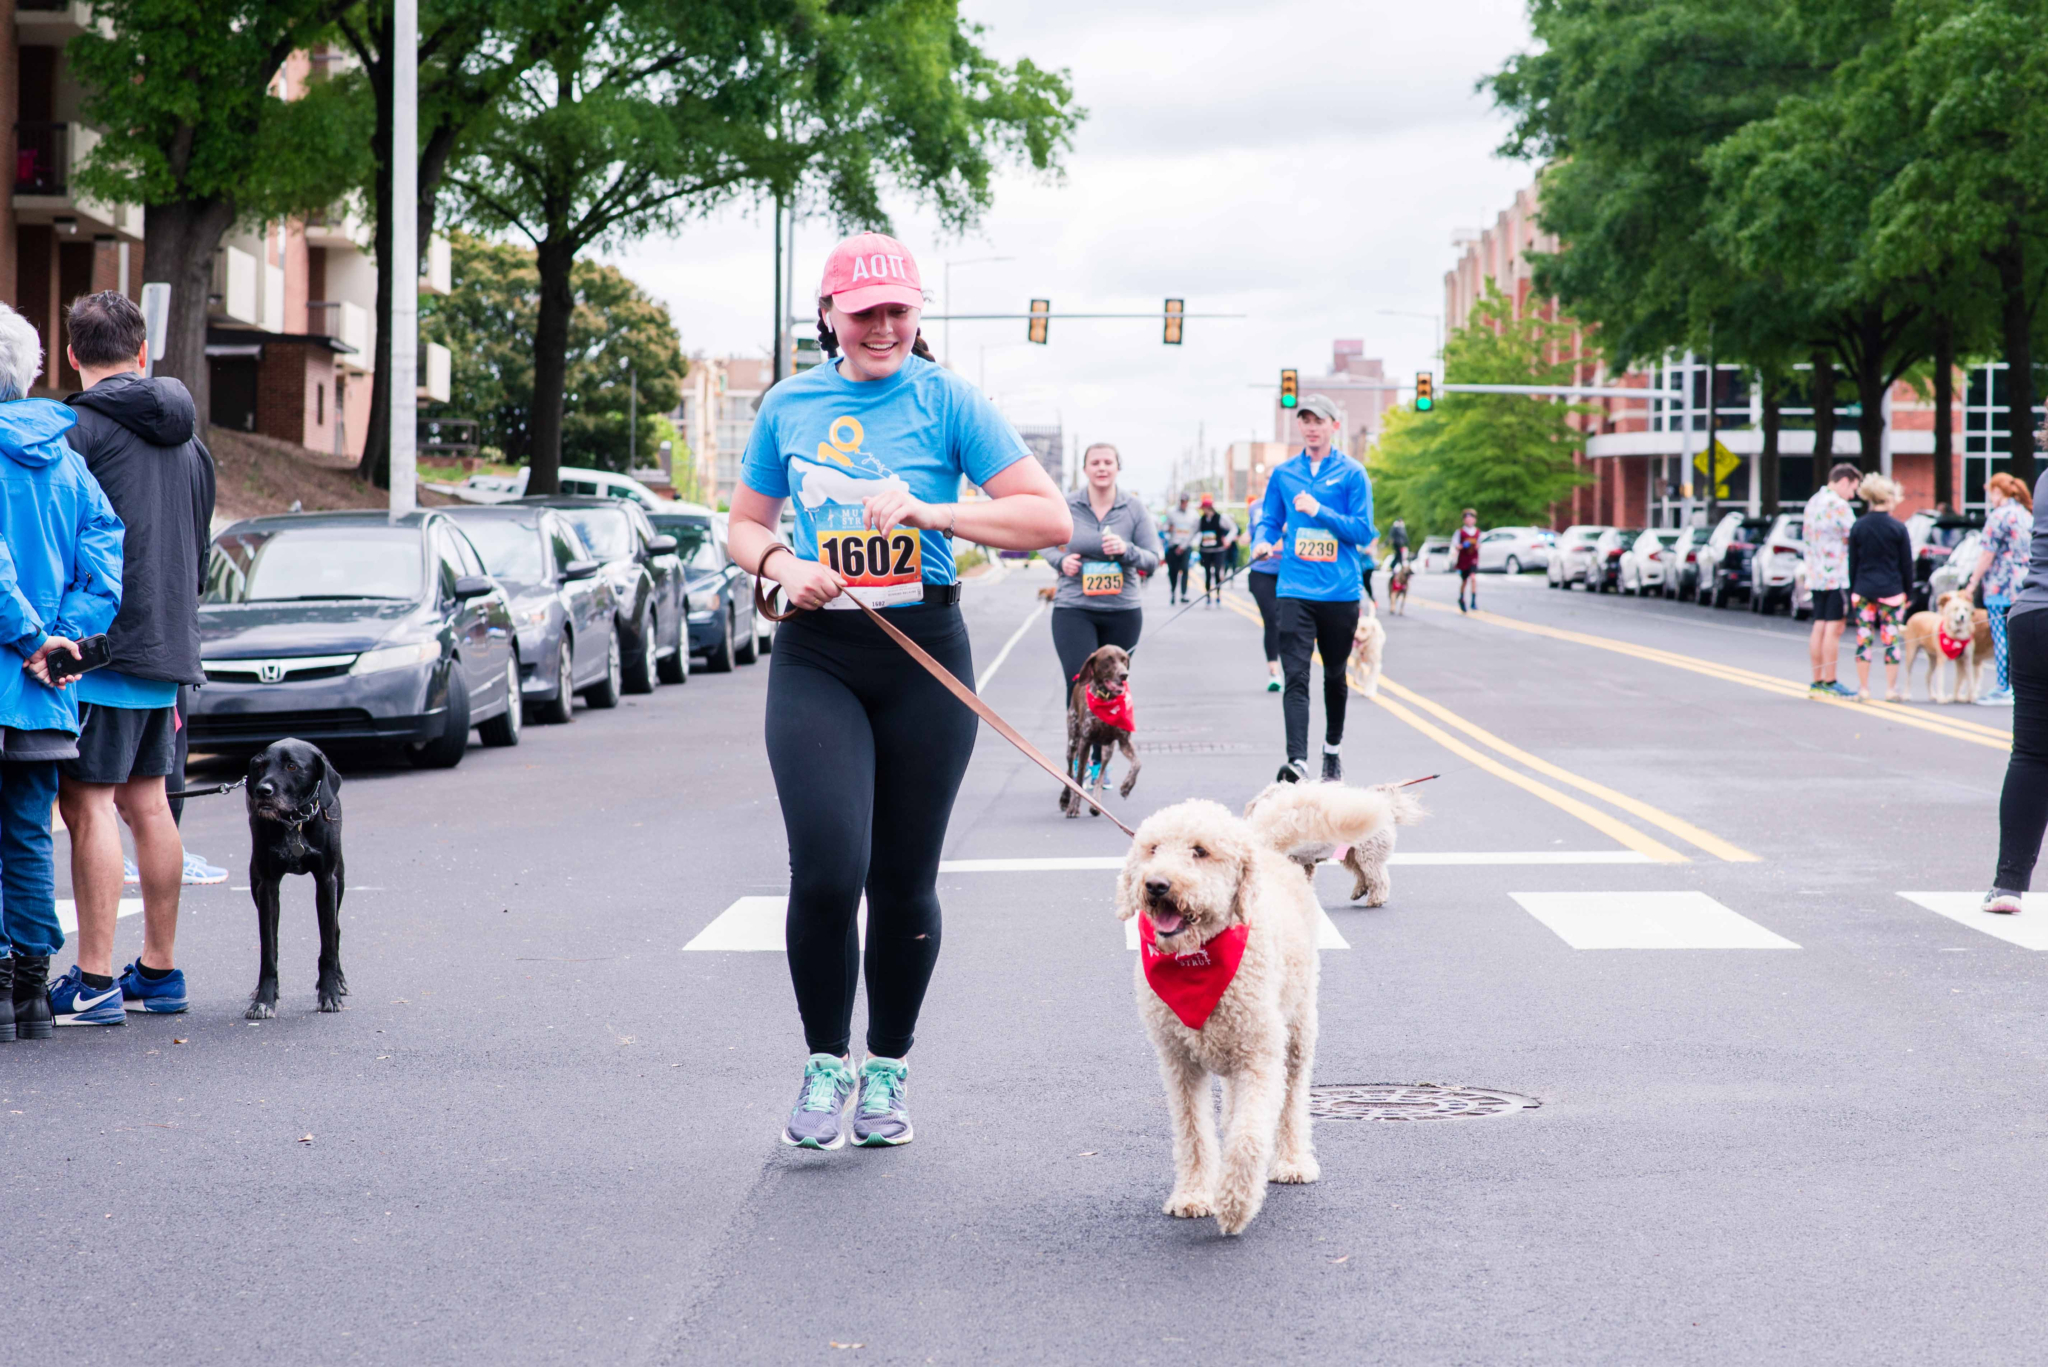 Deborah Michelle Photography 165 8 exciting weekend events in Birmingham including a Mutt Strut—April 21-23